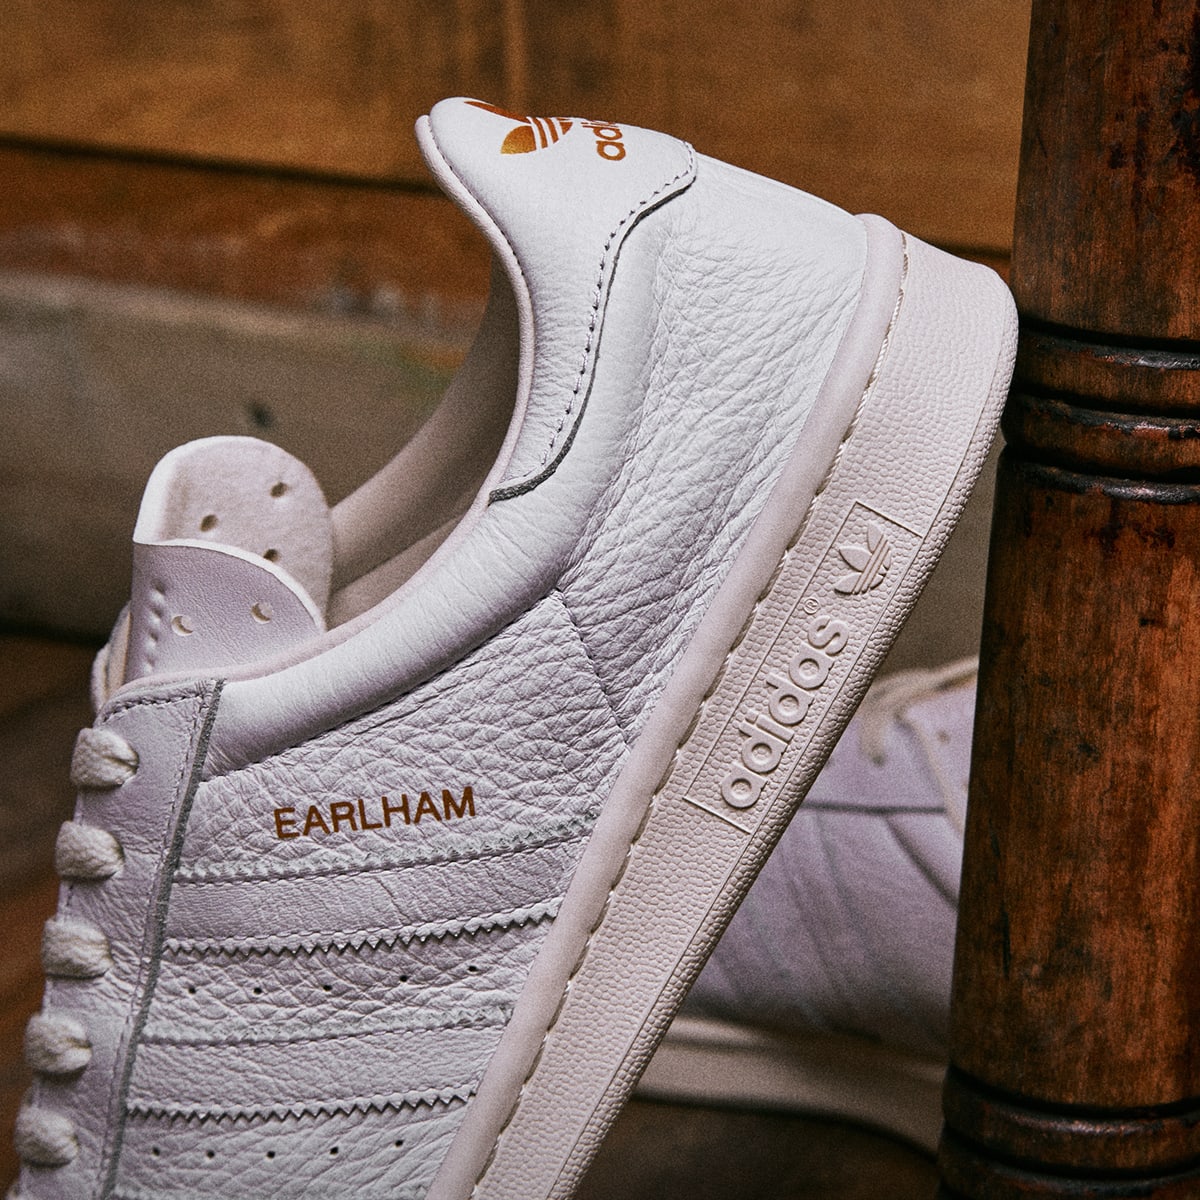 Adidas SPZL Earlham (White ) | END. Launches